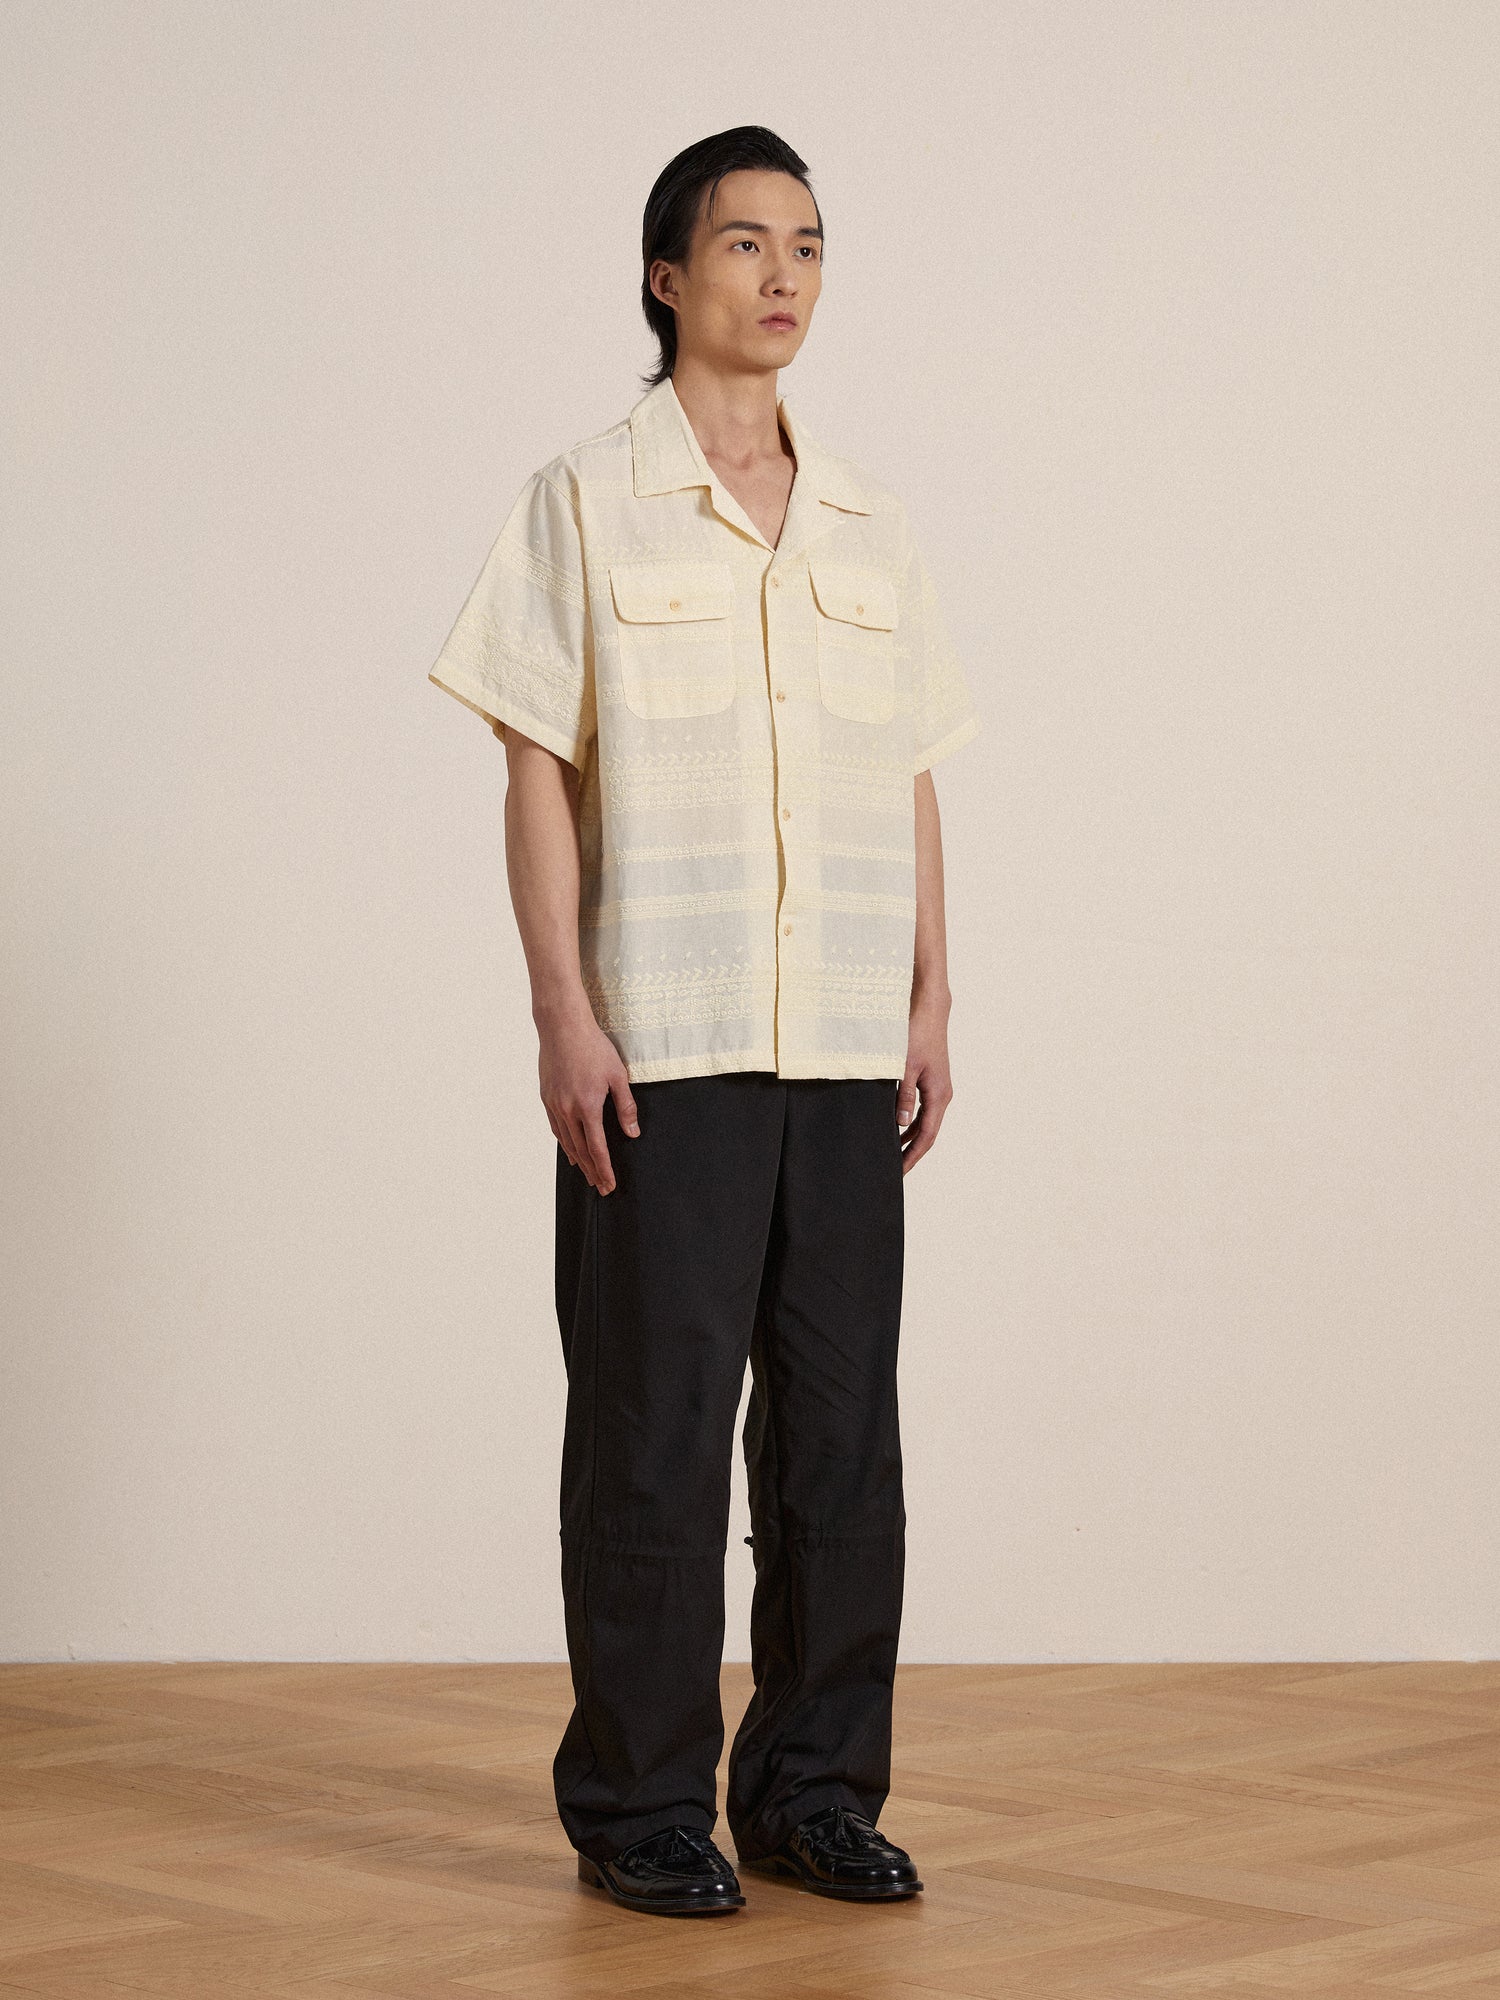 A man wearing a Found premium cotton Lace SS Camp Shirt and black pants.